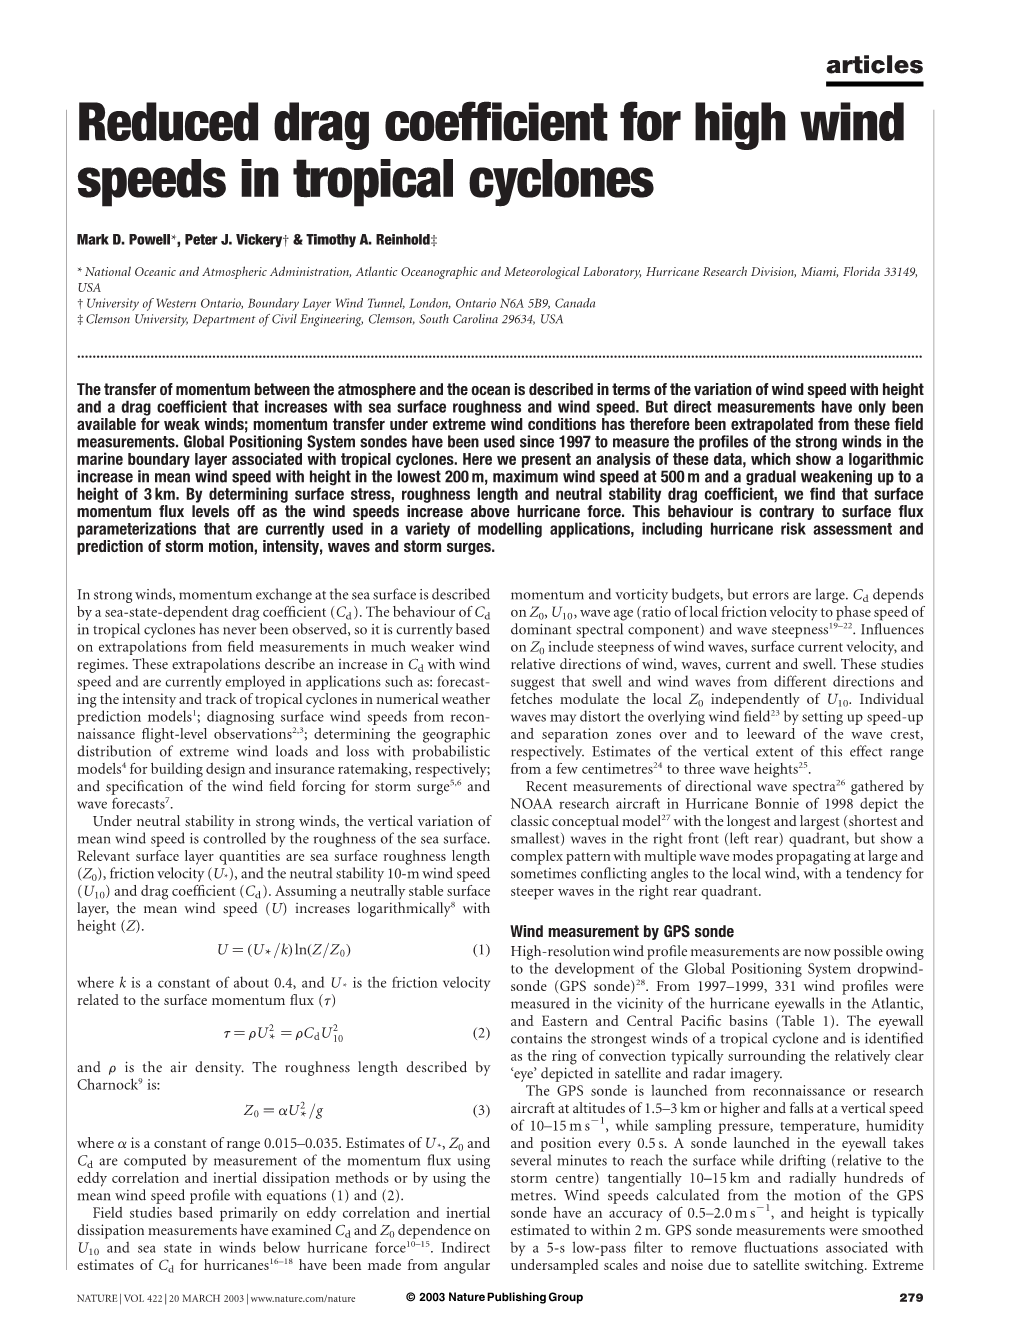 Reduced Drag Coefficient for High Wind Speeds in Tropical Cyclones